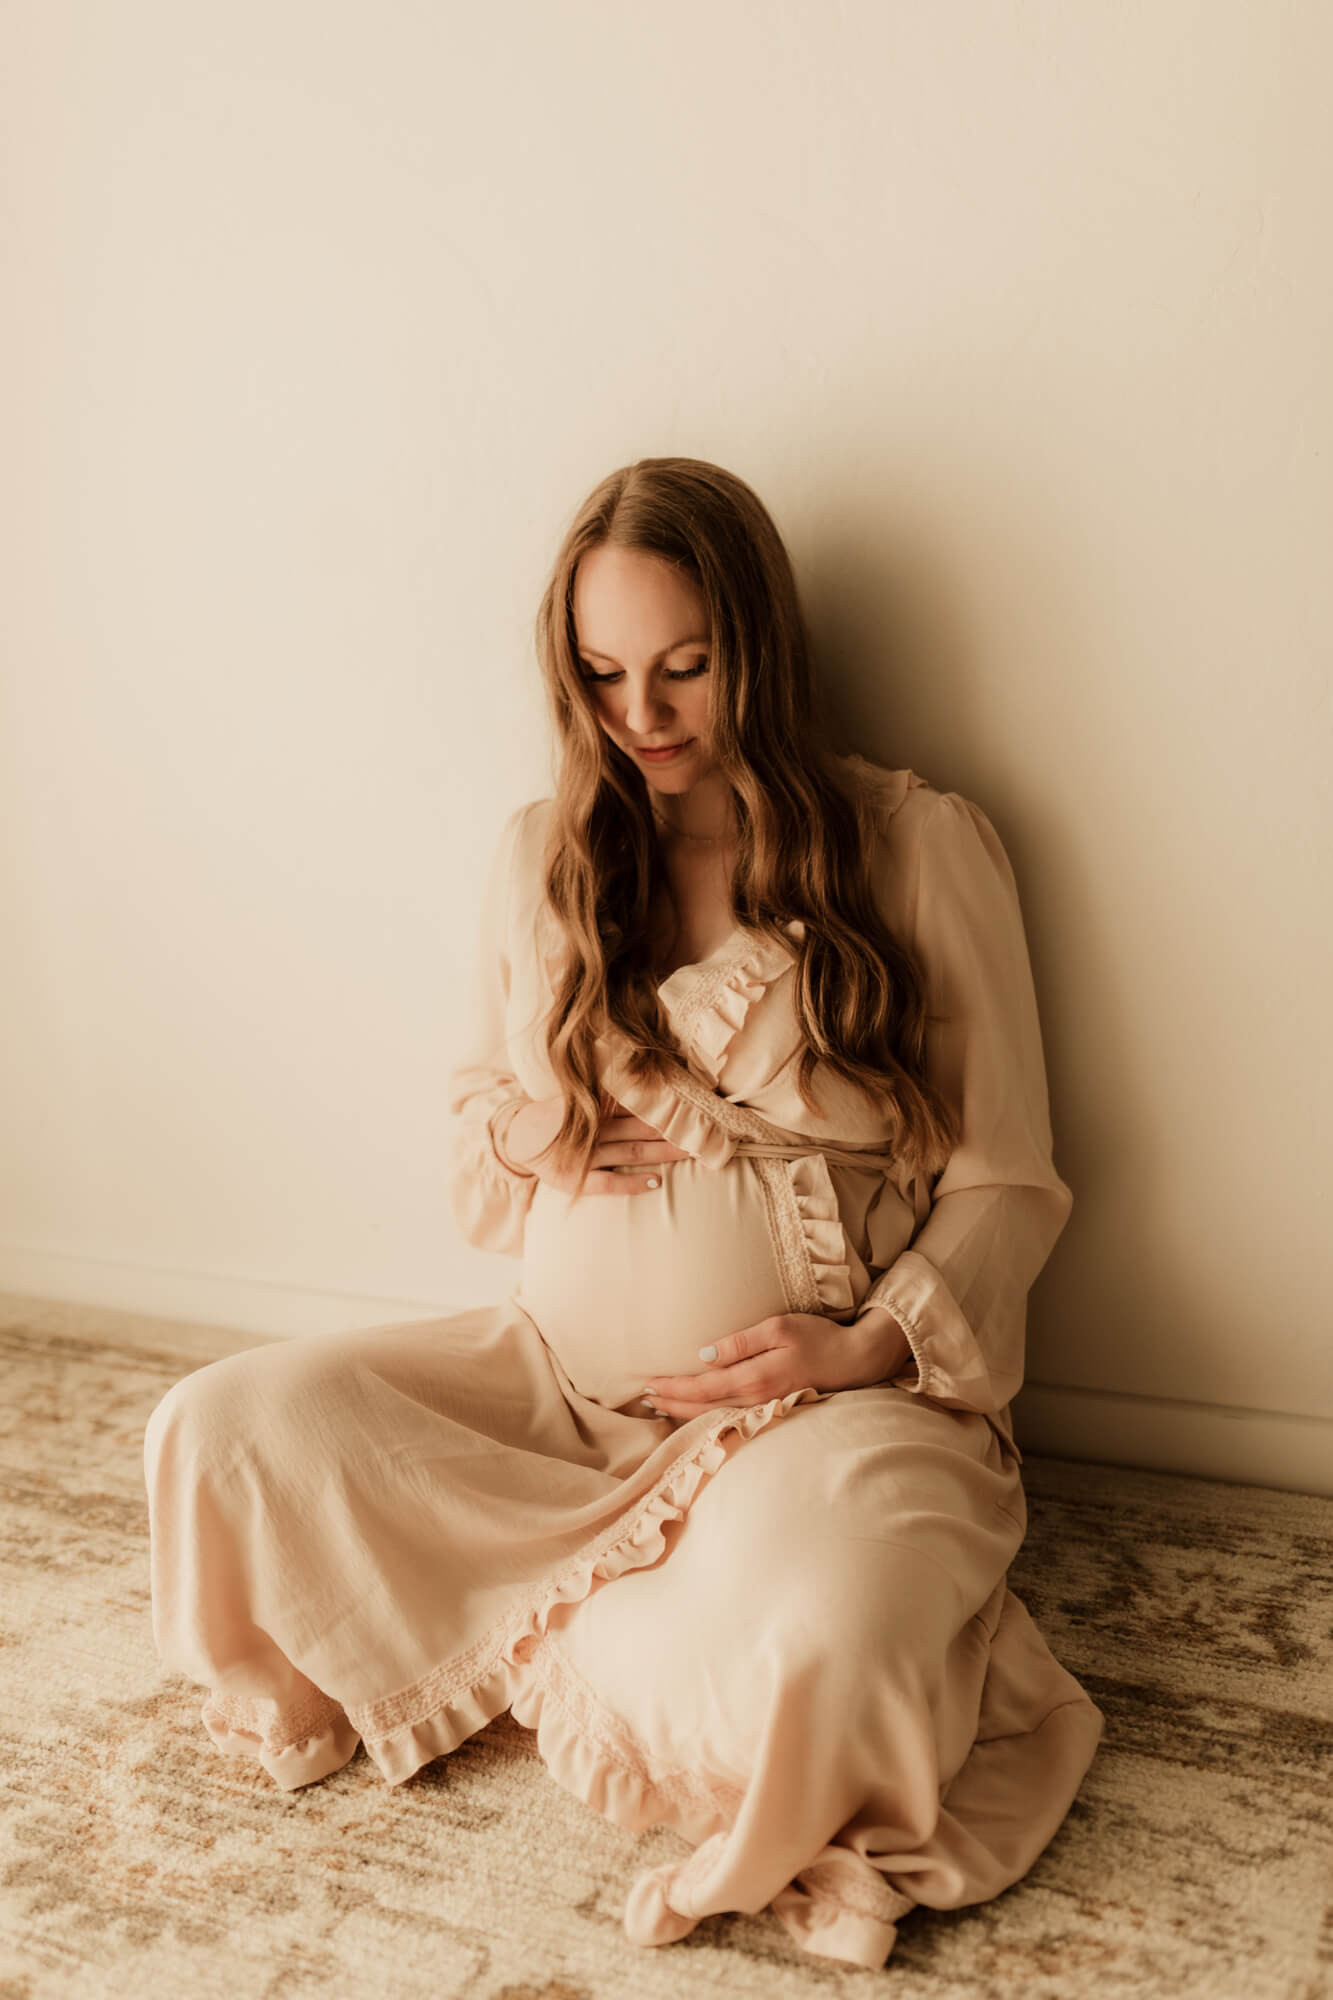 A mom-to-be sits on the floor against a wall holding and looking down on her bump midwife oklahoma city